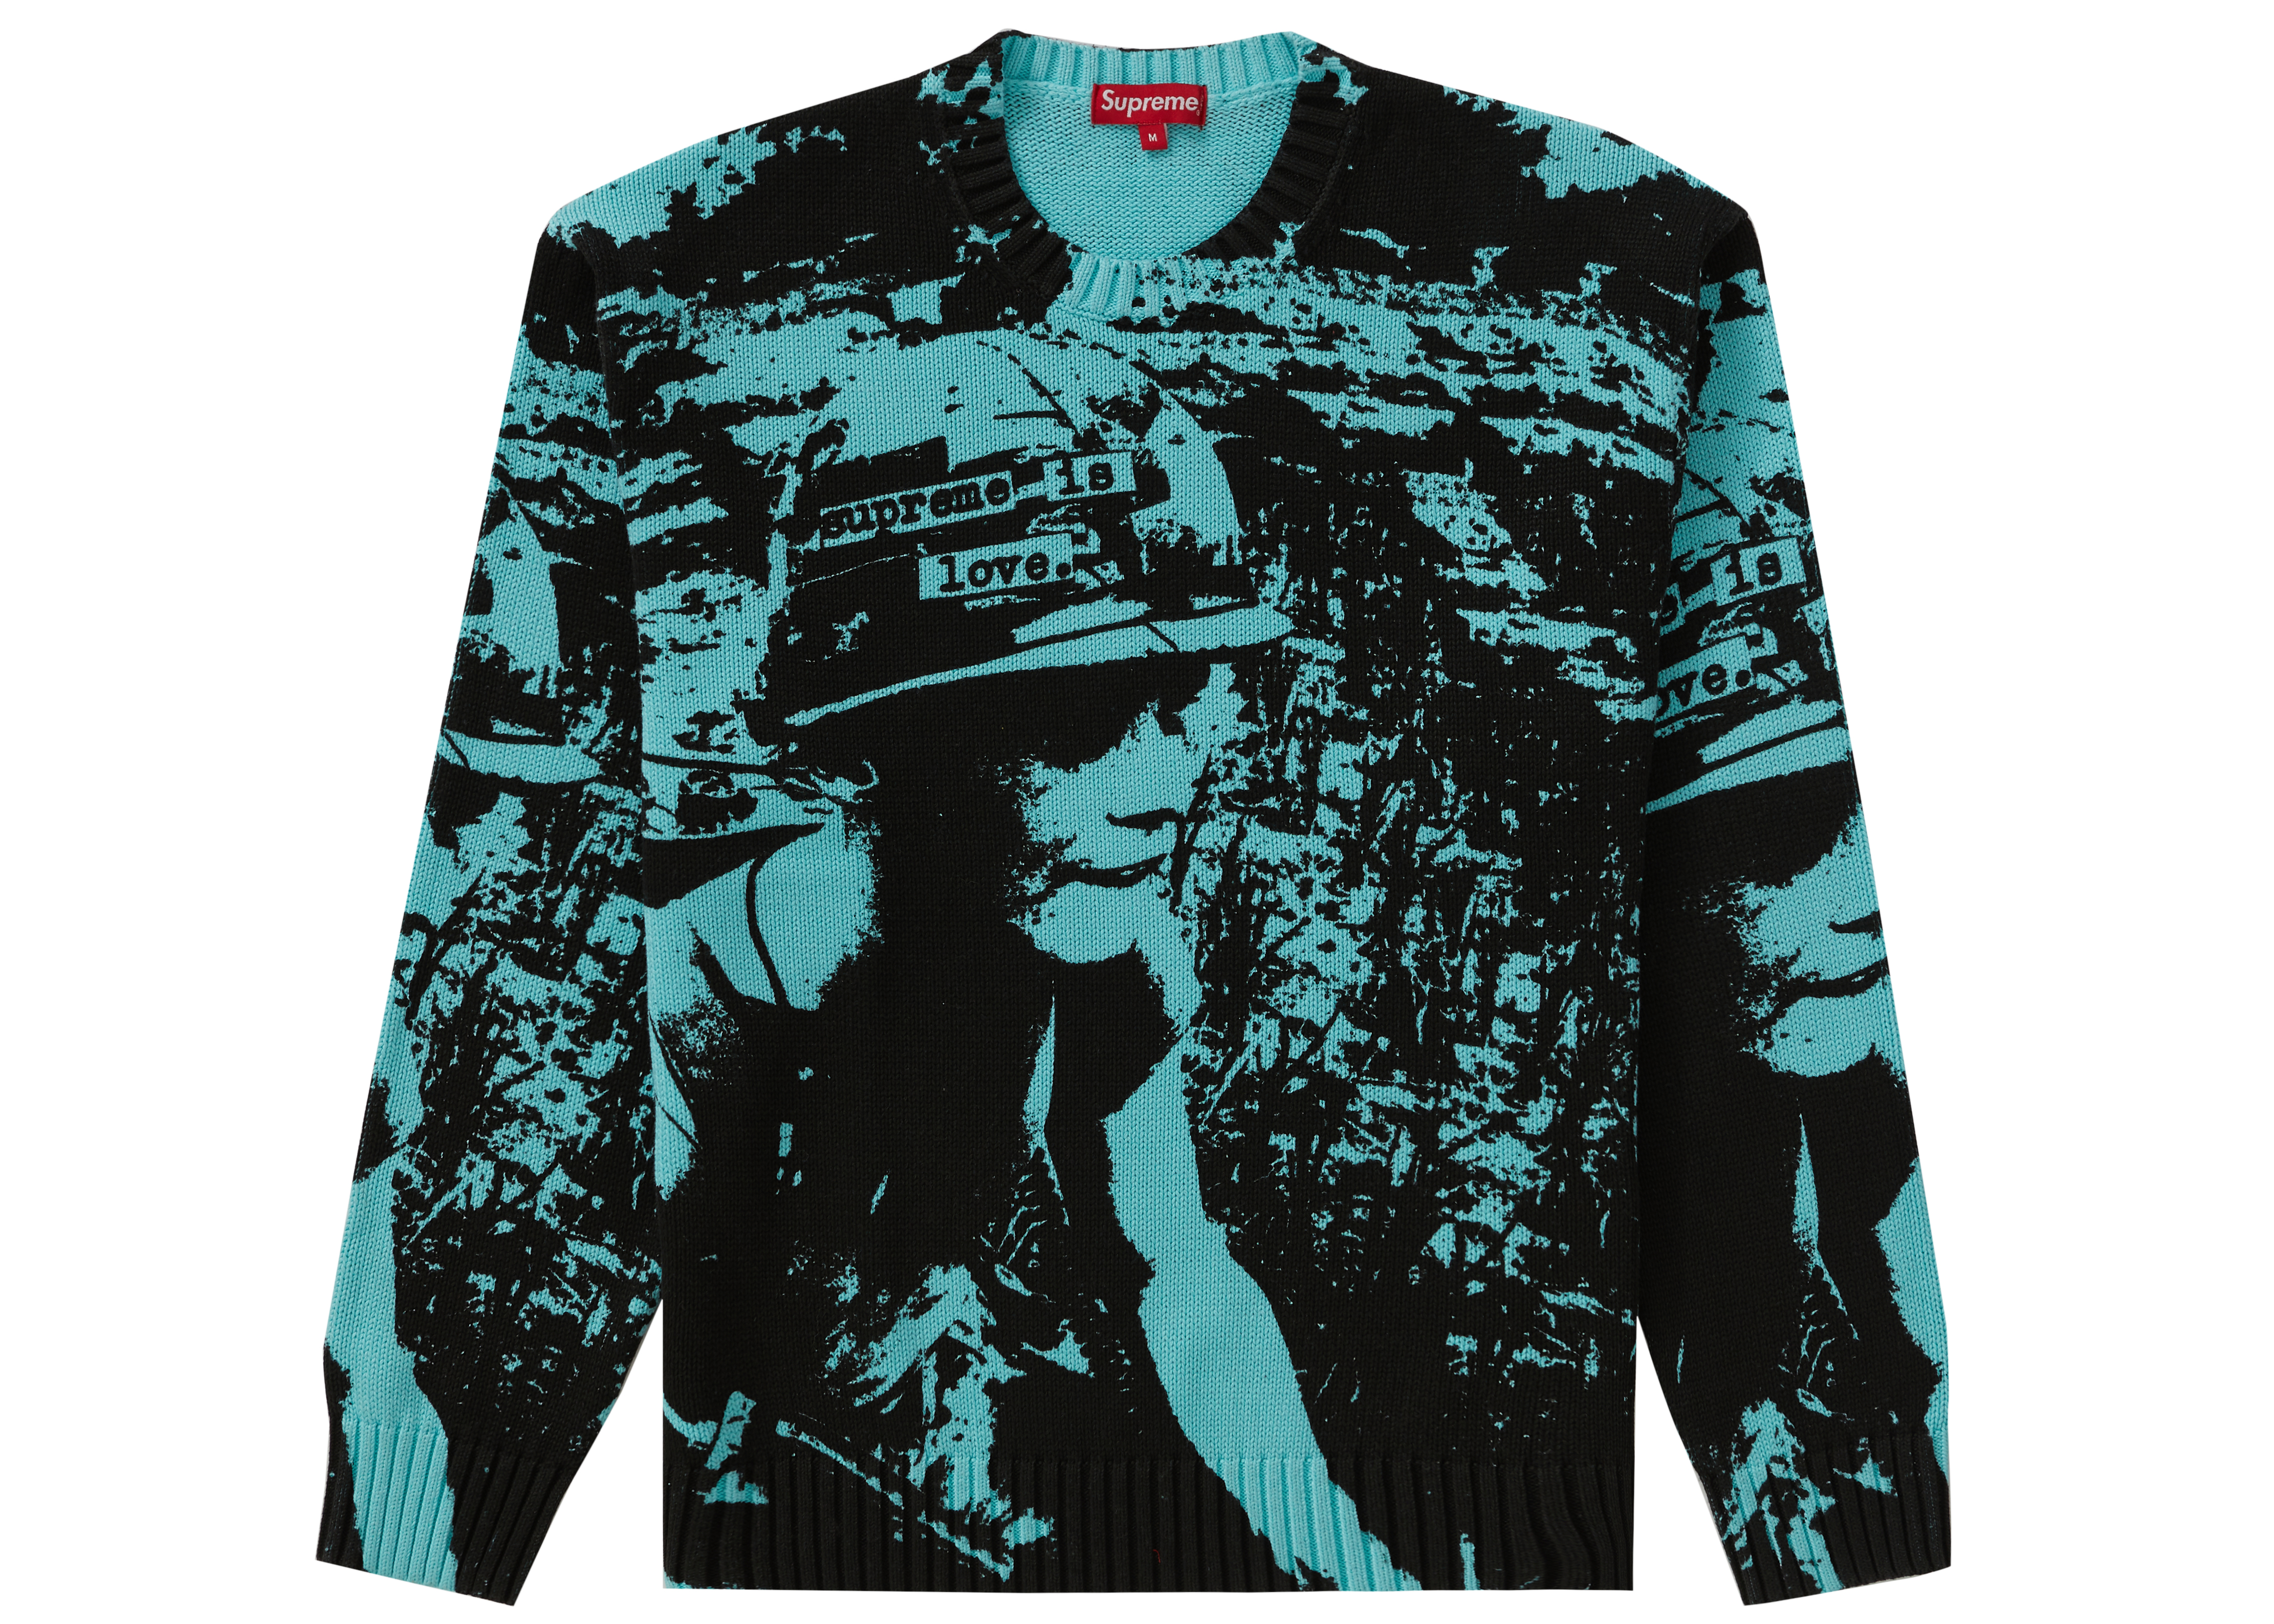 Supreme Supreme is Love Sweater Bright Teal Men's - FW19 - US